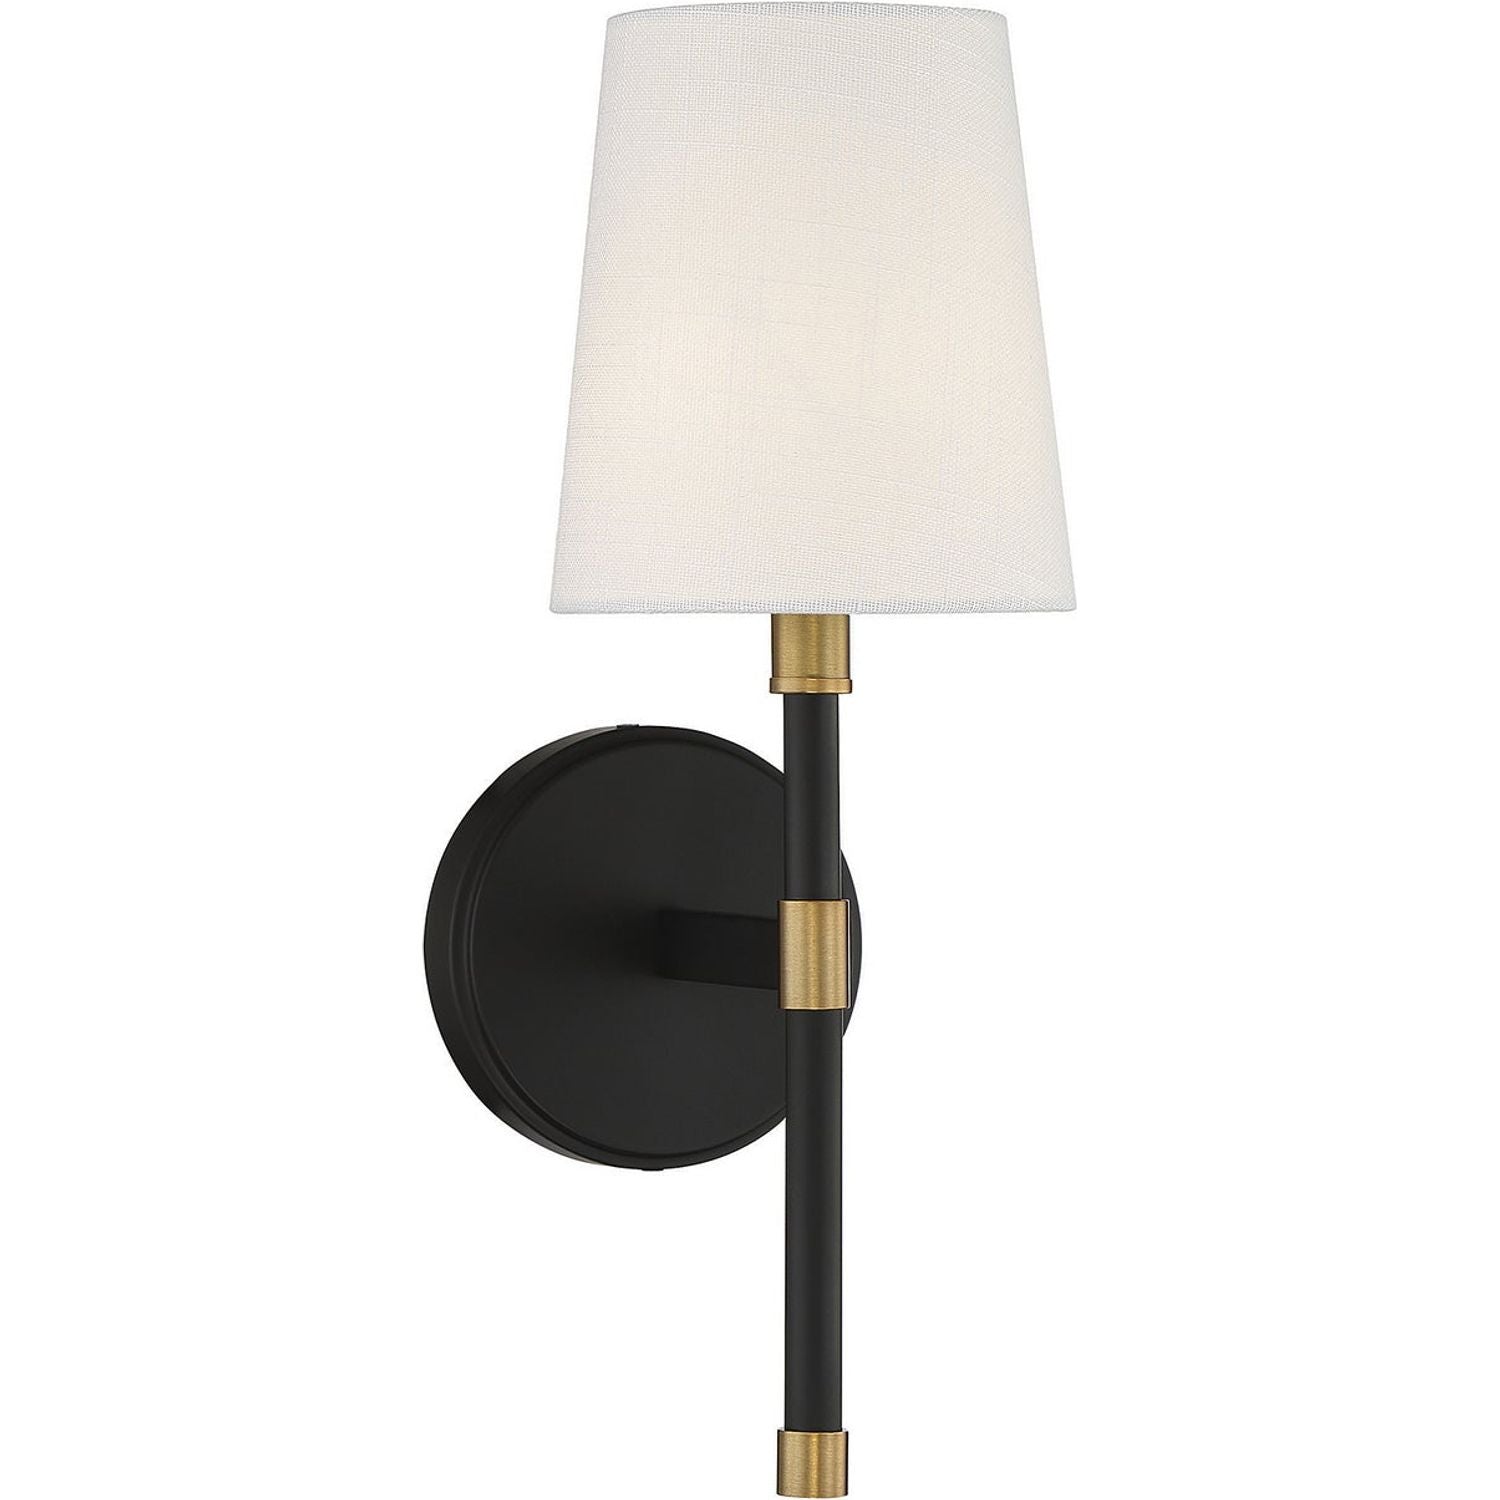 Savoy House - 9-1632-1-143 - One Light Wall Sconce - Brody - Matte Black with Warm Brass Accents